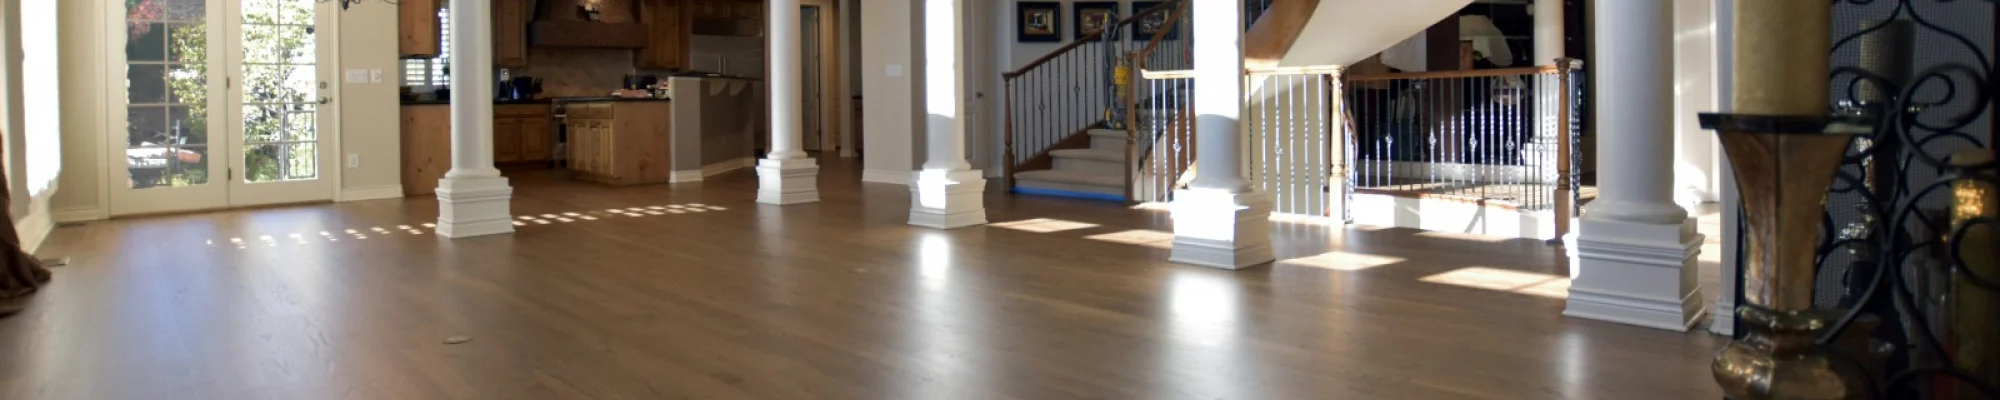 Hardwood flooring & refinishing services offered at Classic Carpet & Flooring in Florissant, MO